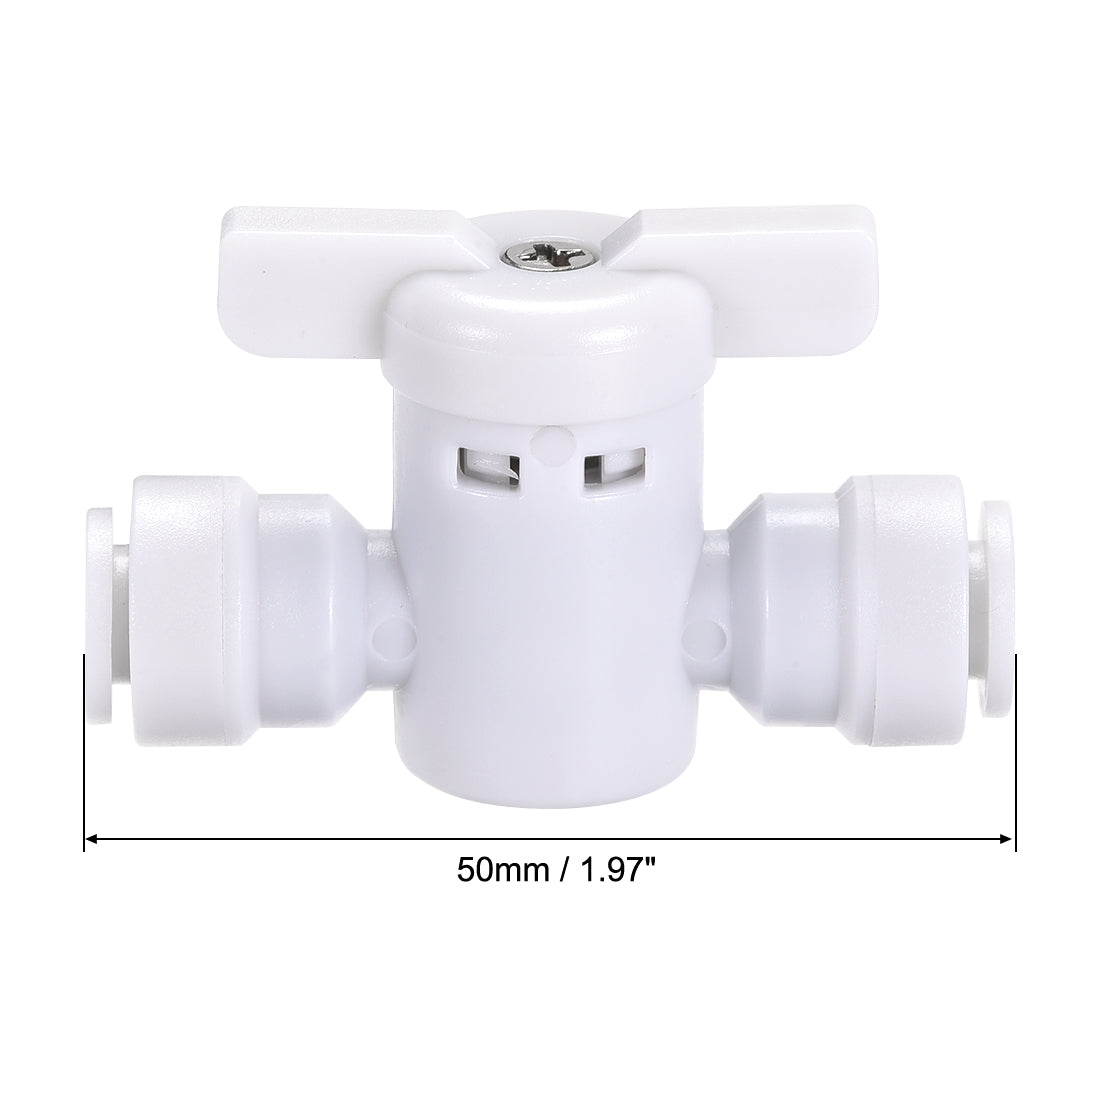 uxcell Uxcell Ball Valve Quick Connect Fitting, 1/4" Tube Outer Diameter, for Water Purifiers, White 10Pcs